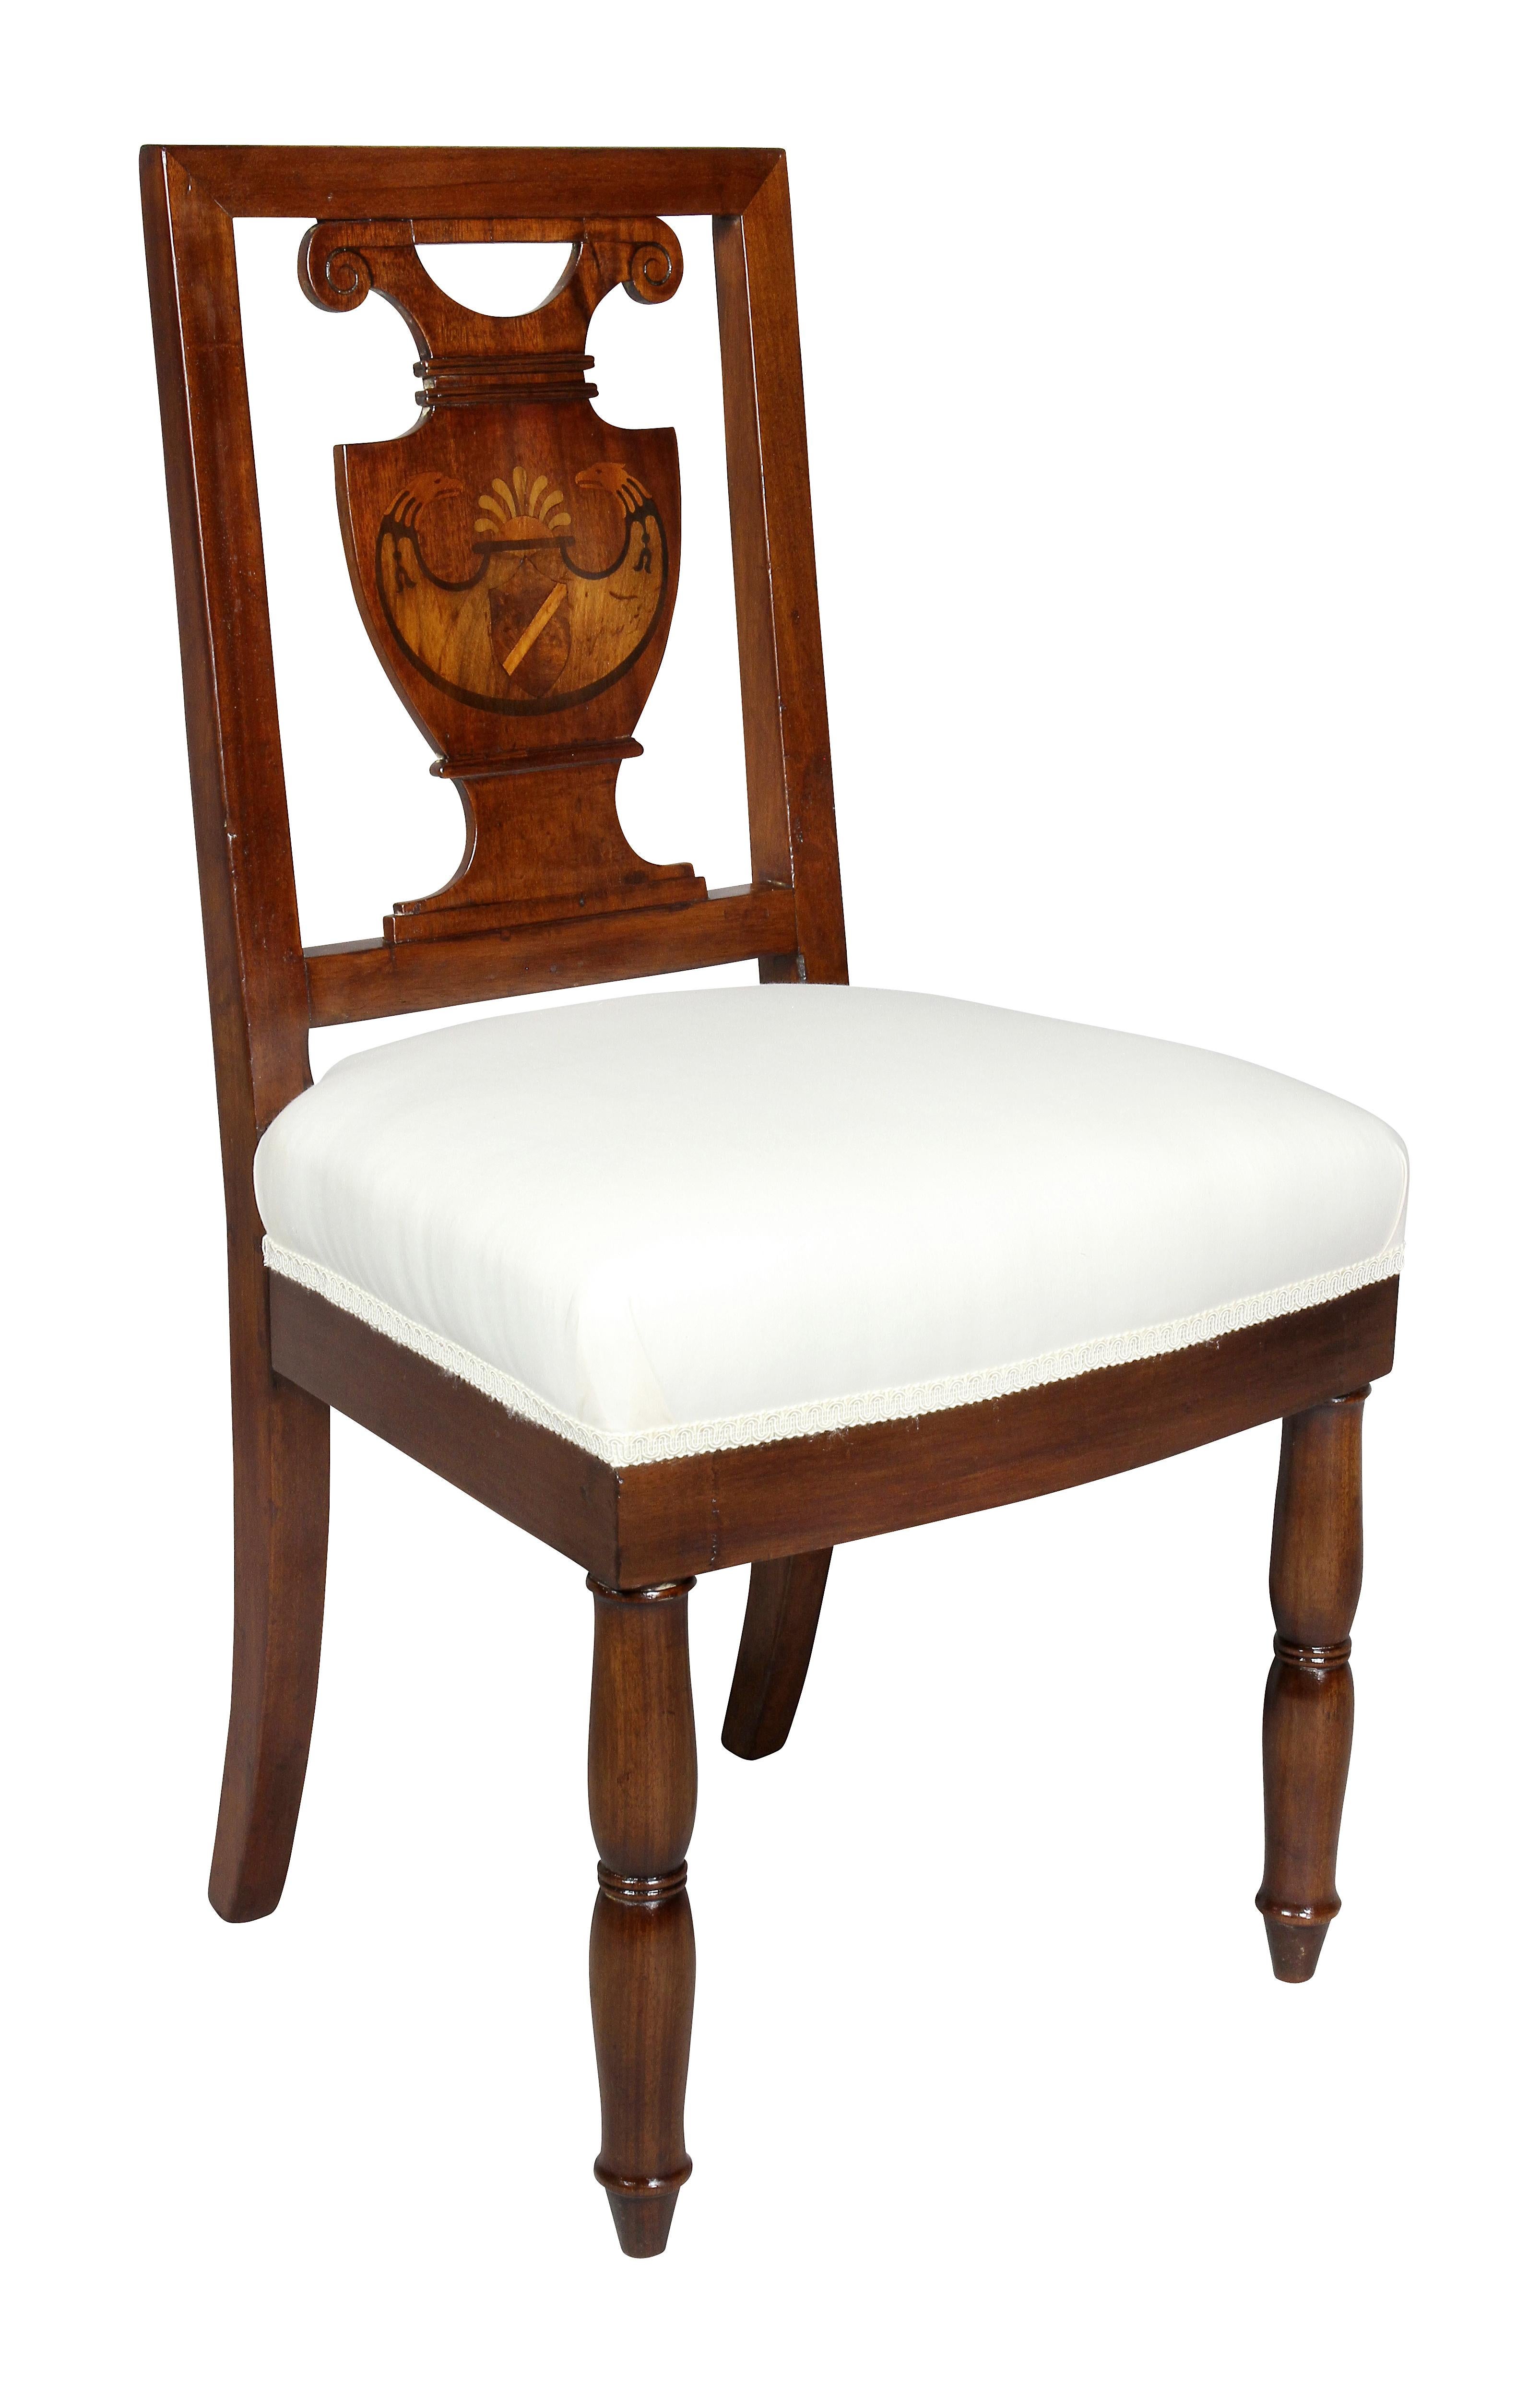 Each with square backs and urn form splat with inlaid shield with double eagle head and rising sun with various woods, completely newly upholstered seats, circular turned legs. Each chair inscribed on seat rail in contemporary of the period script